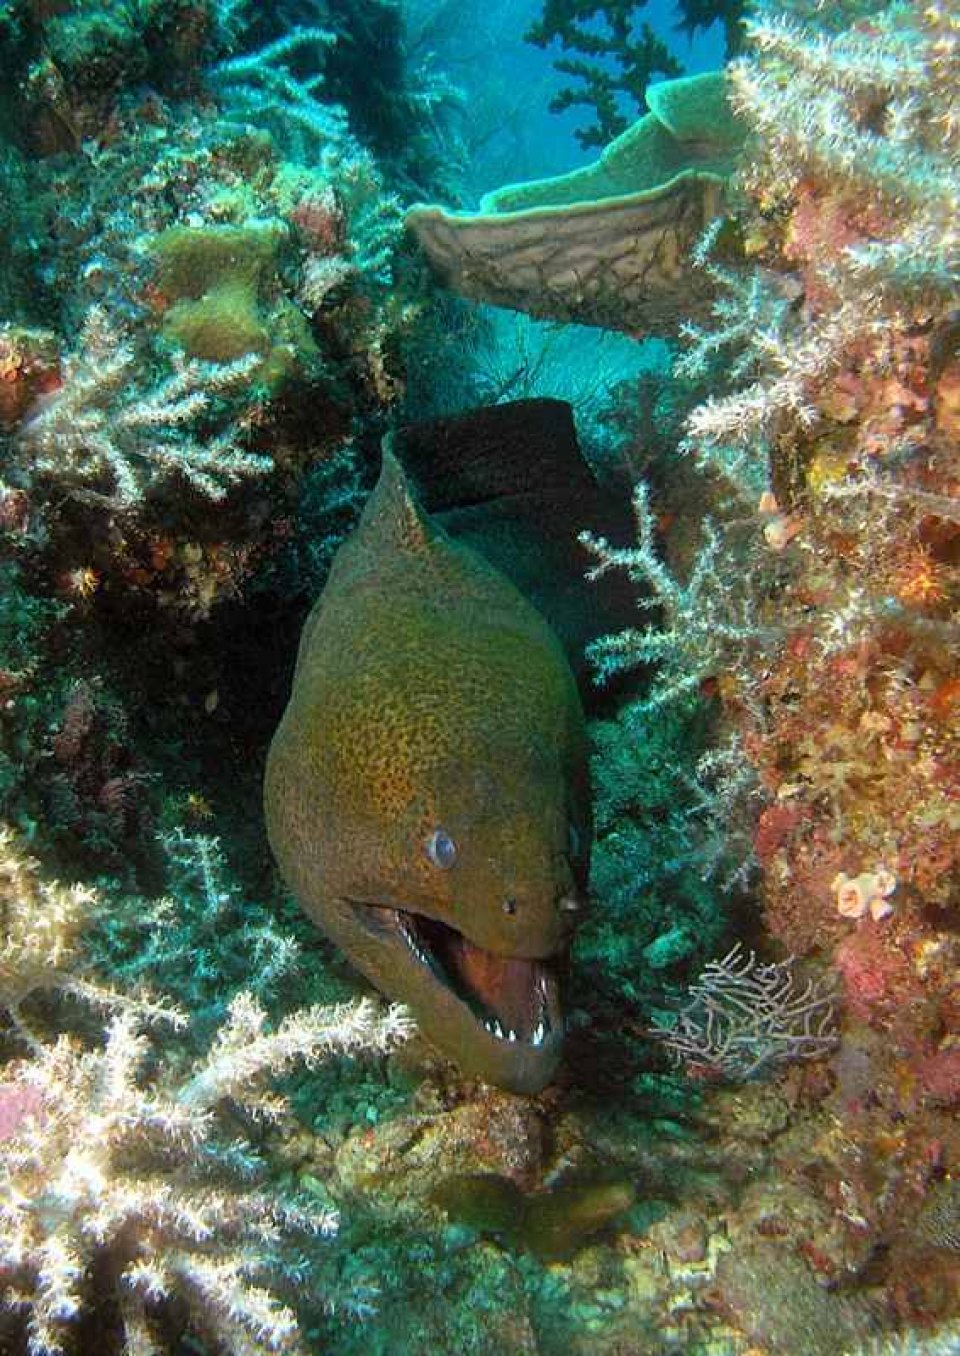 Giant Morray Eel at Chebeh Island dive site